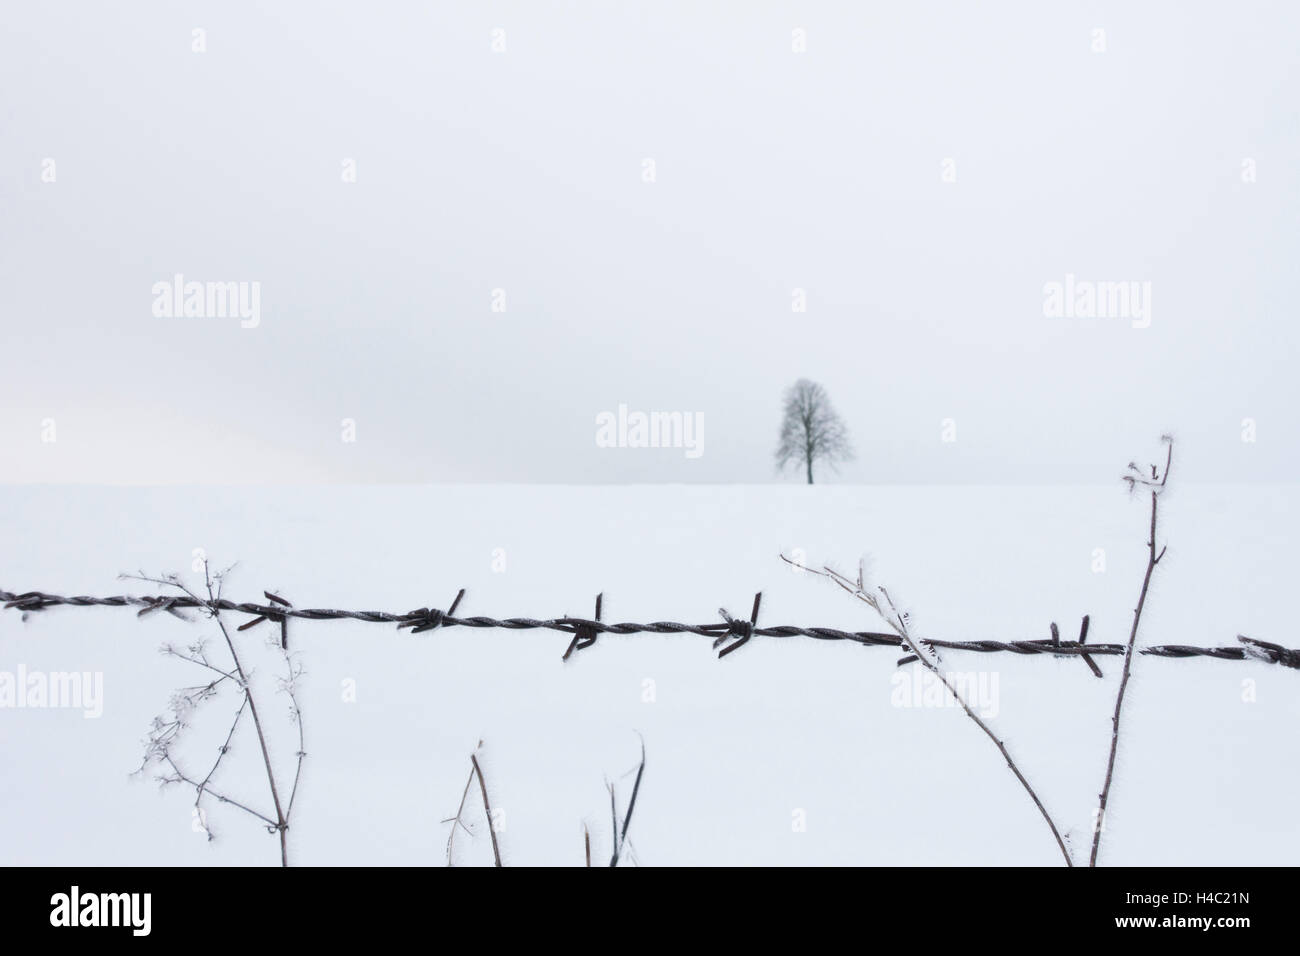 Snow scenery with tree and barbed wire Stock Photo